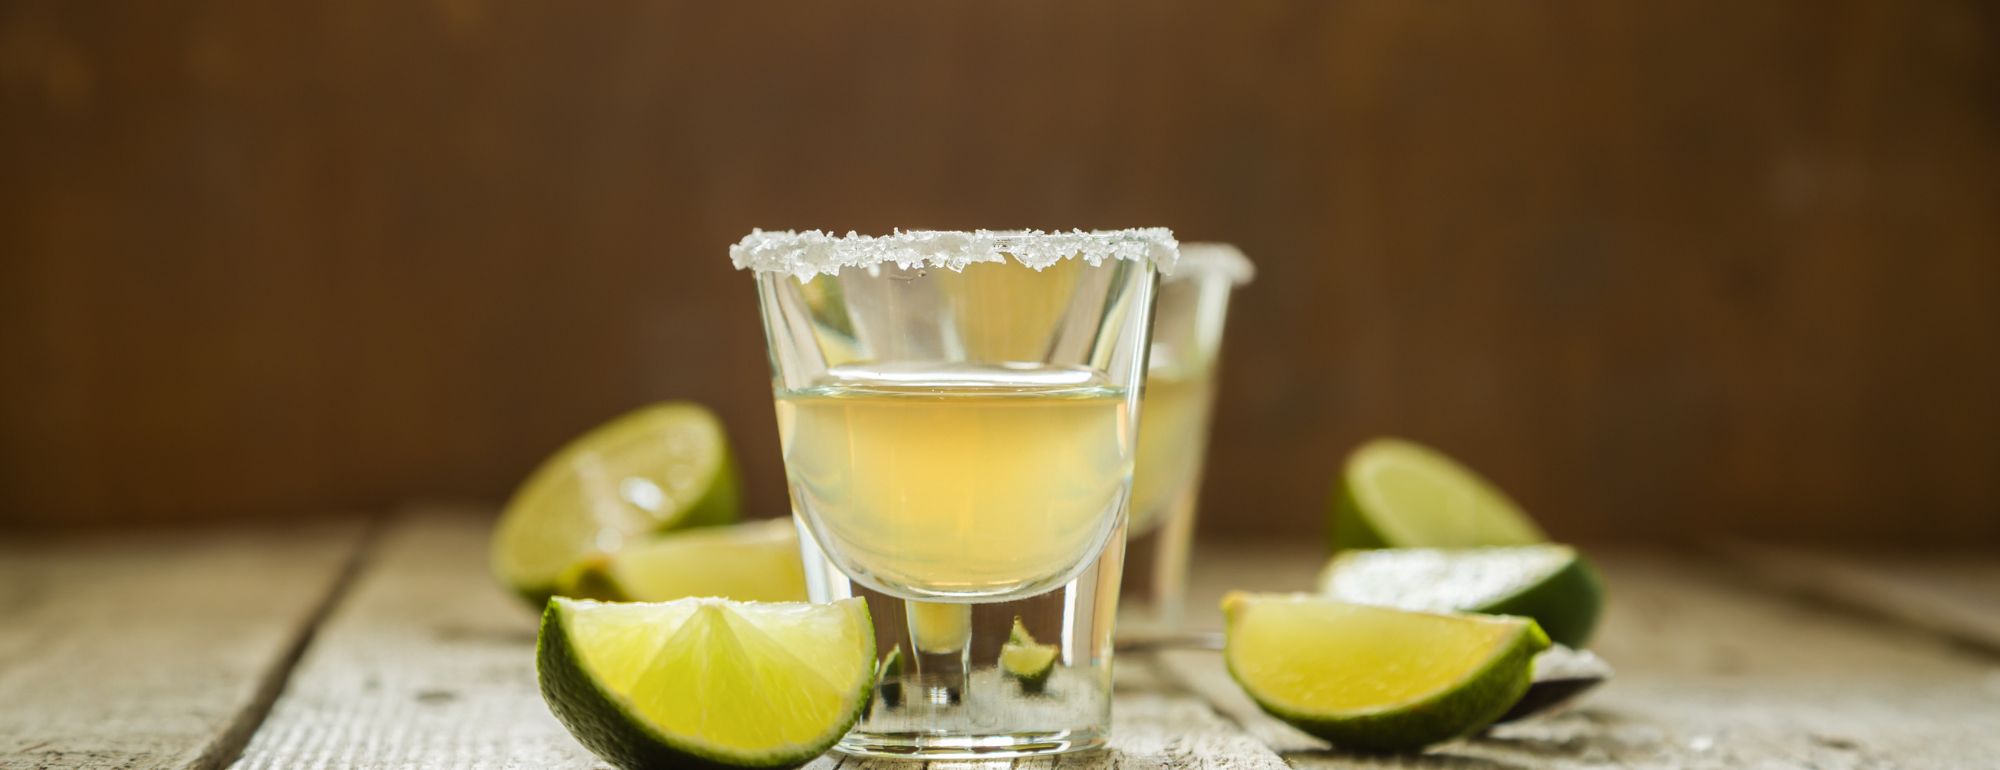 tequilaq